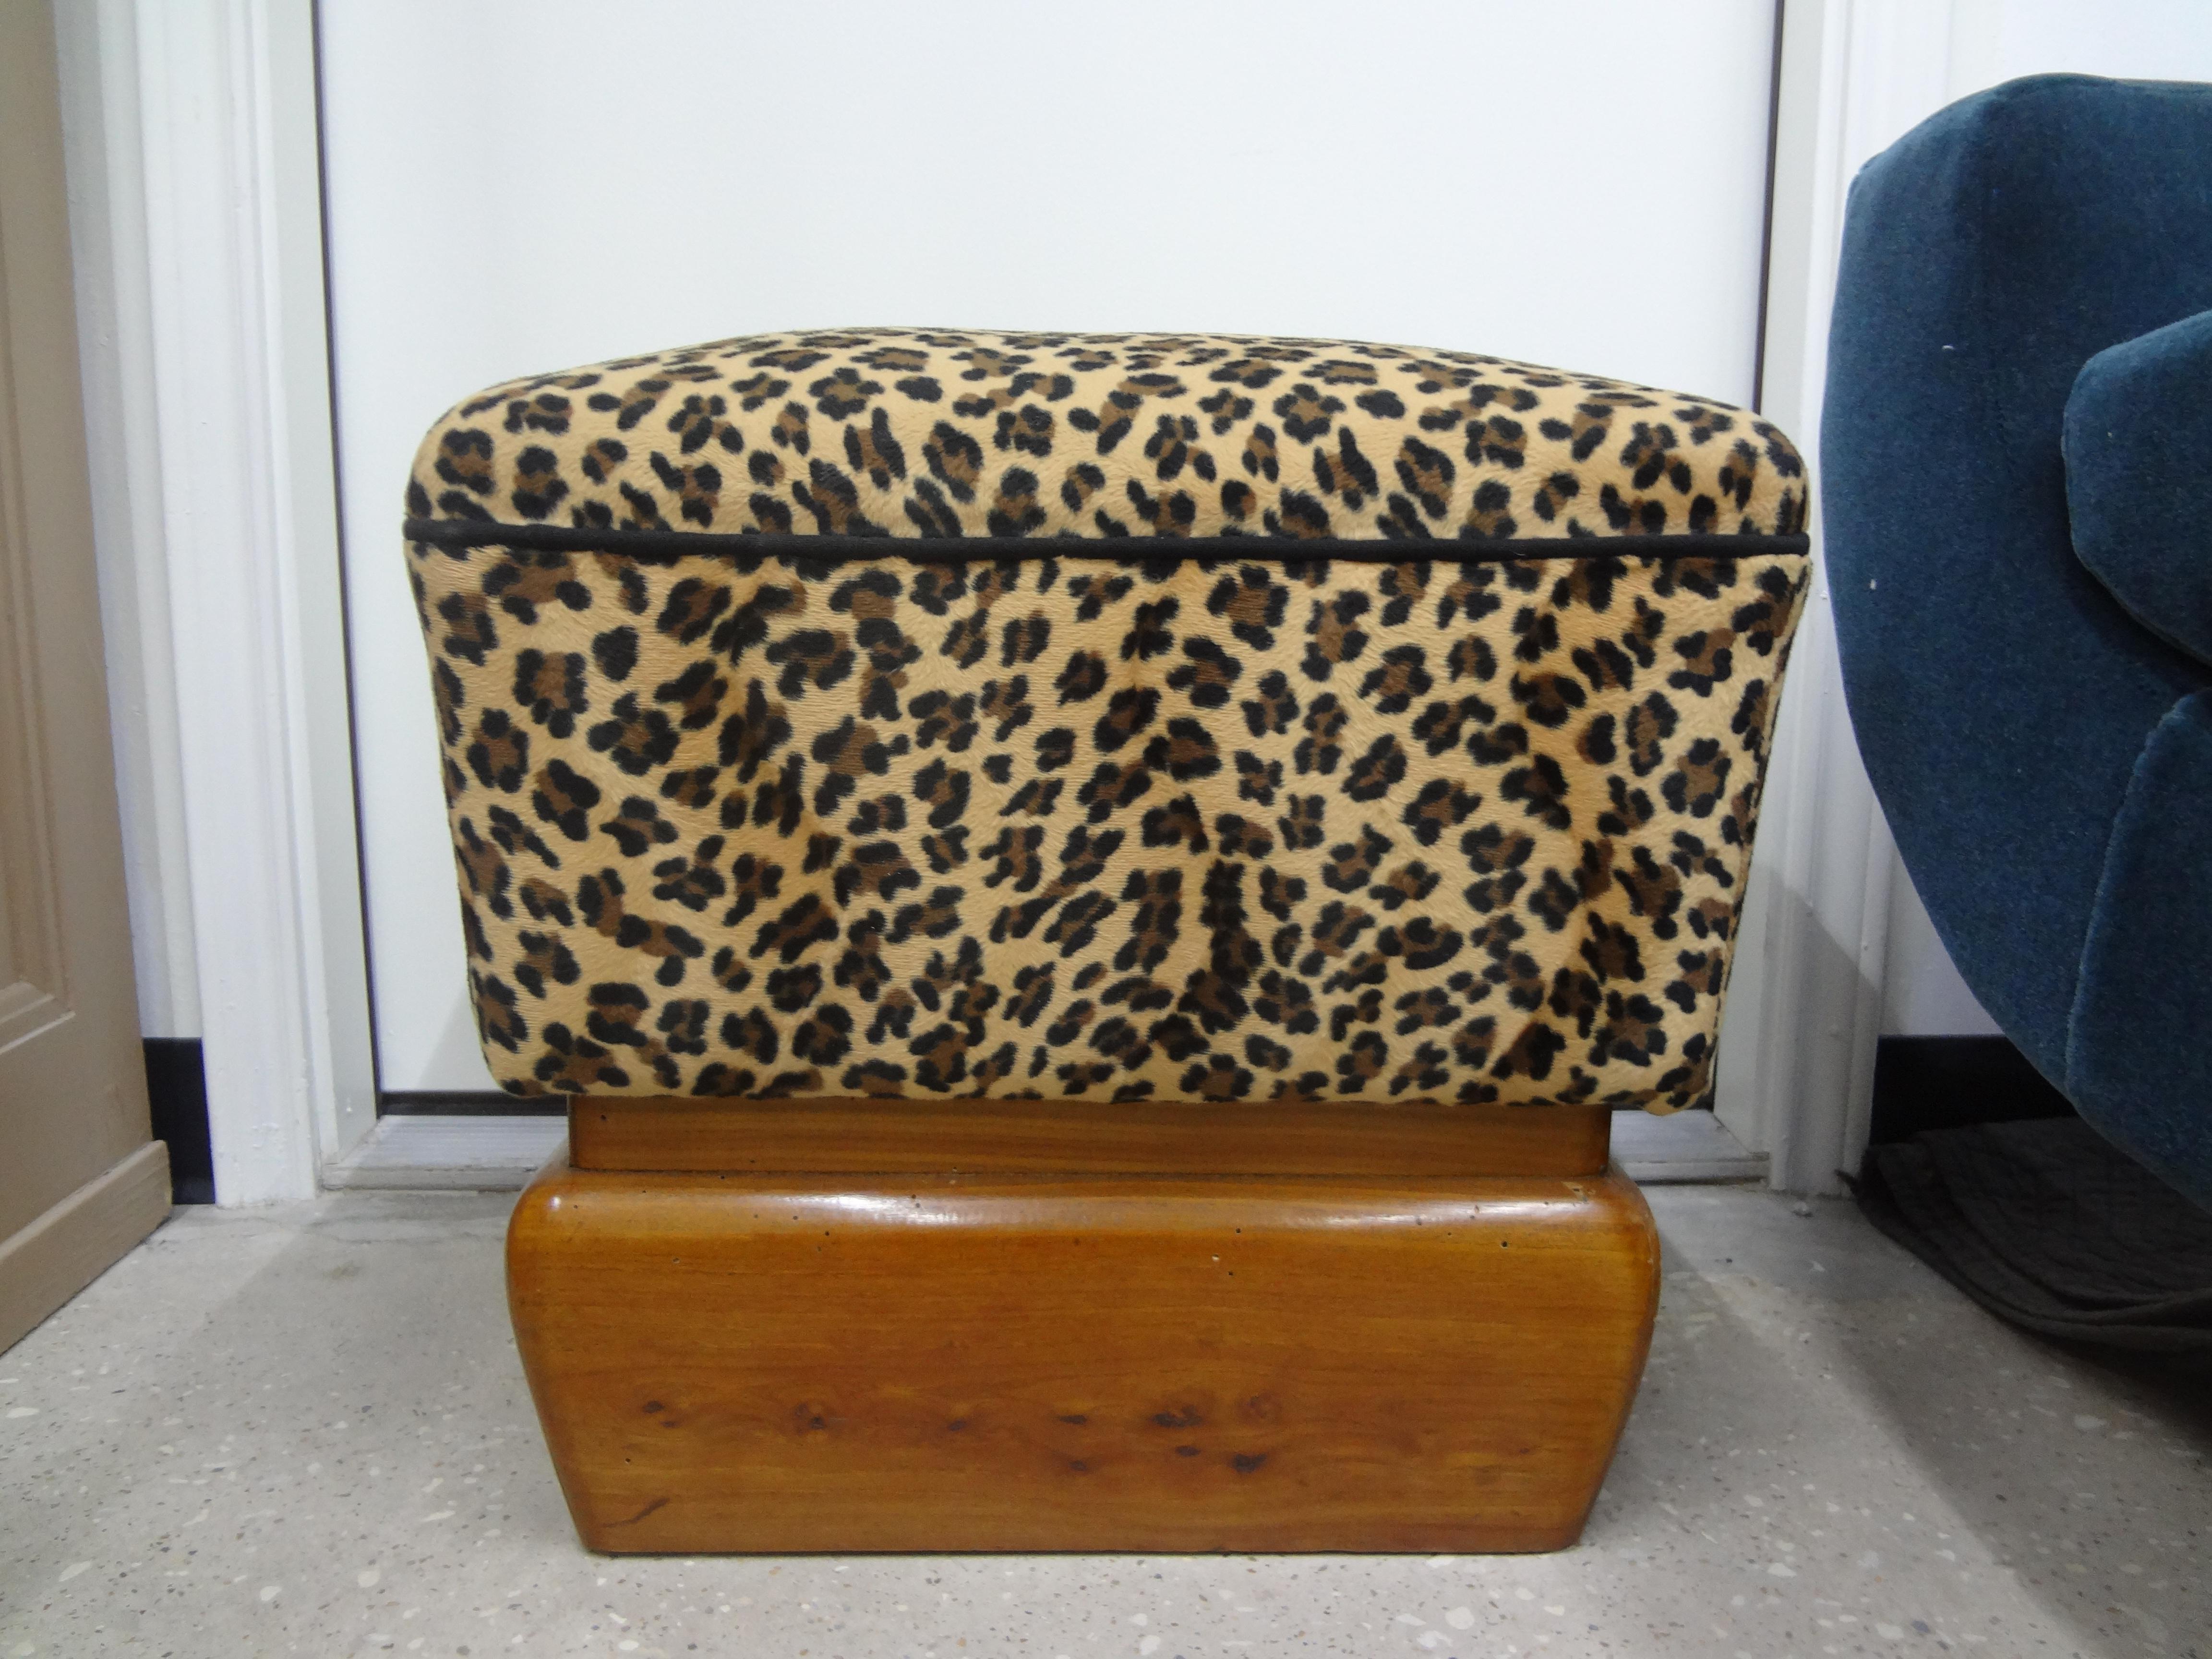 Italian Art Deco Bench Or Ottoman.
This handsome Italian Art Deco Bench has a plinth base and is currently upholstered in leopard print fabric.
Easy to reupholster if needed.